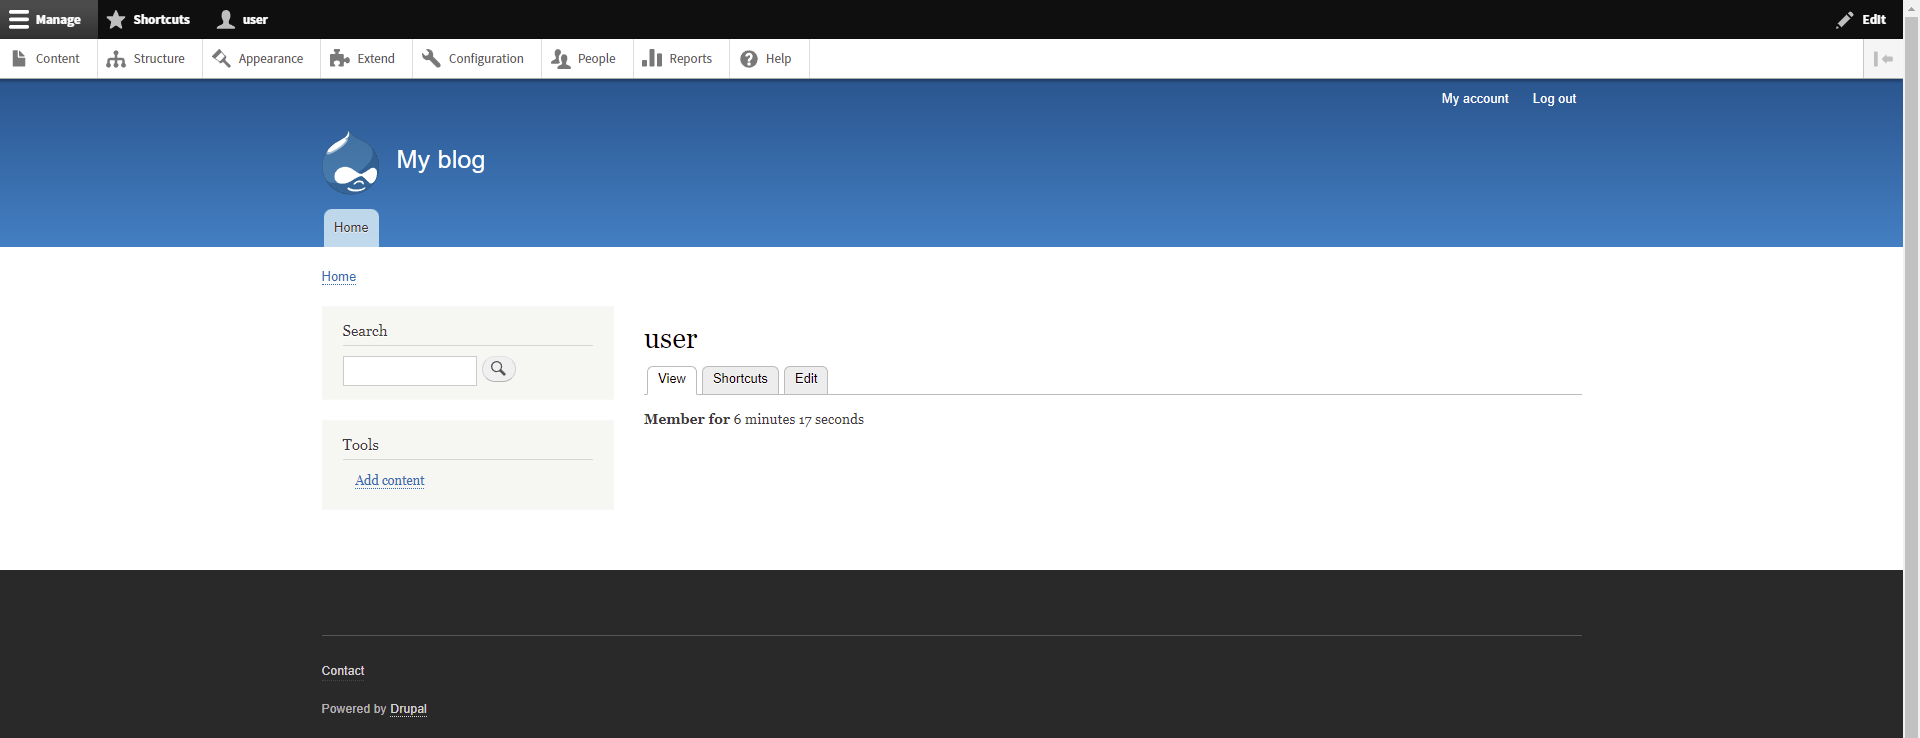 At the end of the installation process, we log in to the Drupal panel